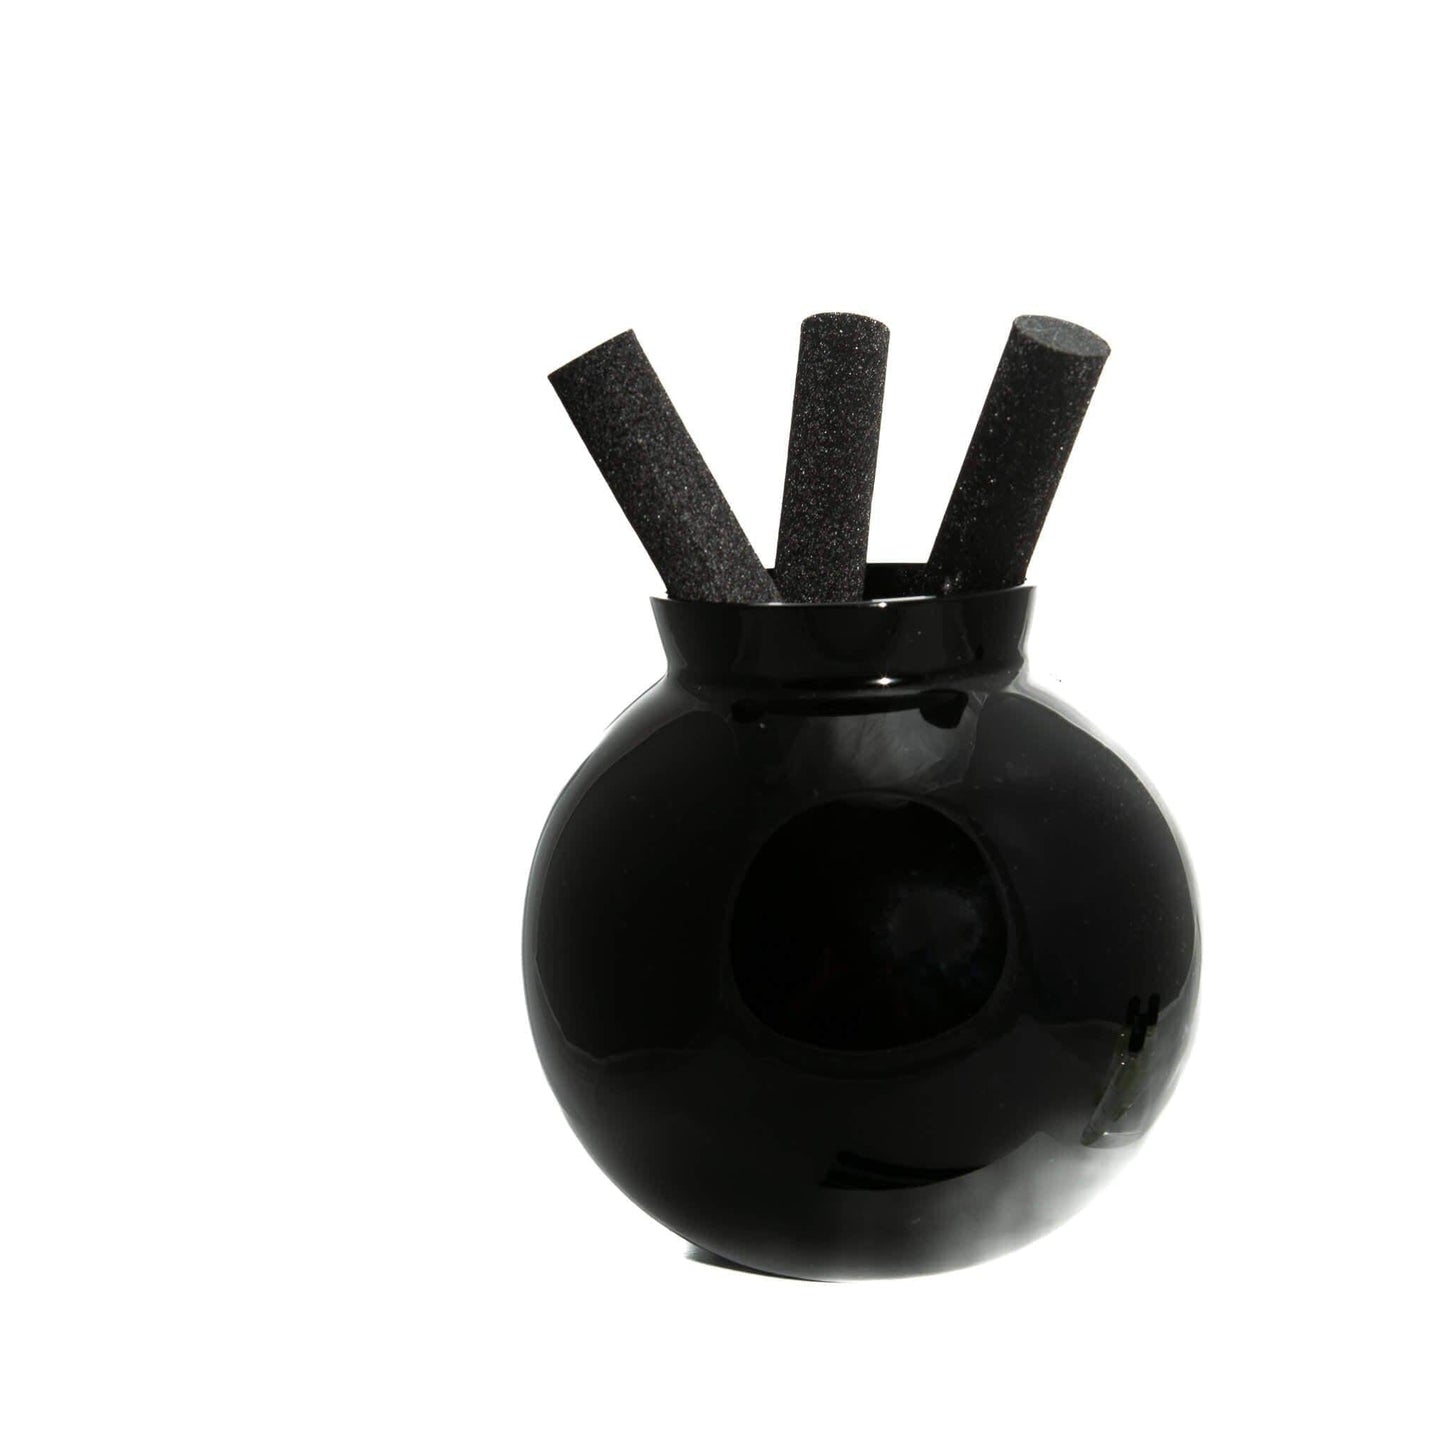 Limited Edition Luxe Diffuser with Mega Reeds - Home Fragrances-Sunday Forever